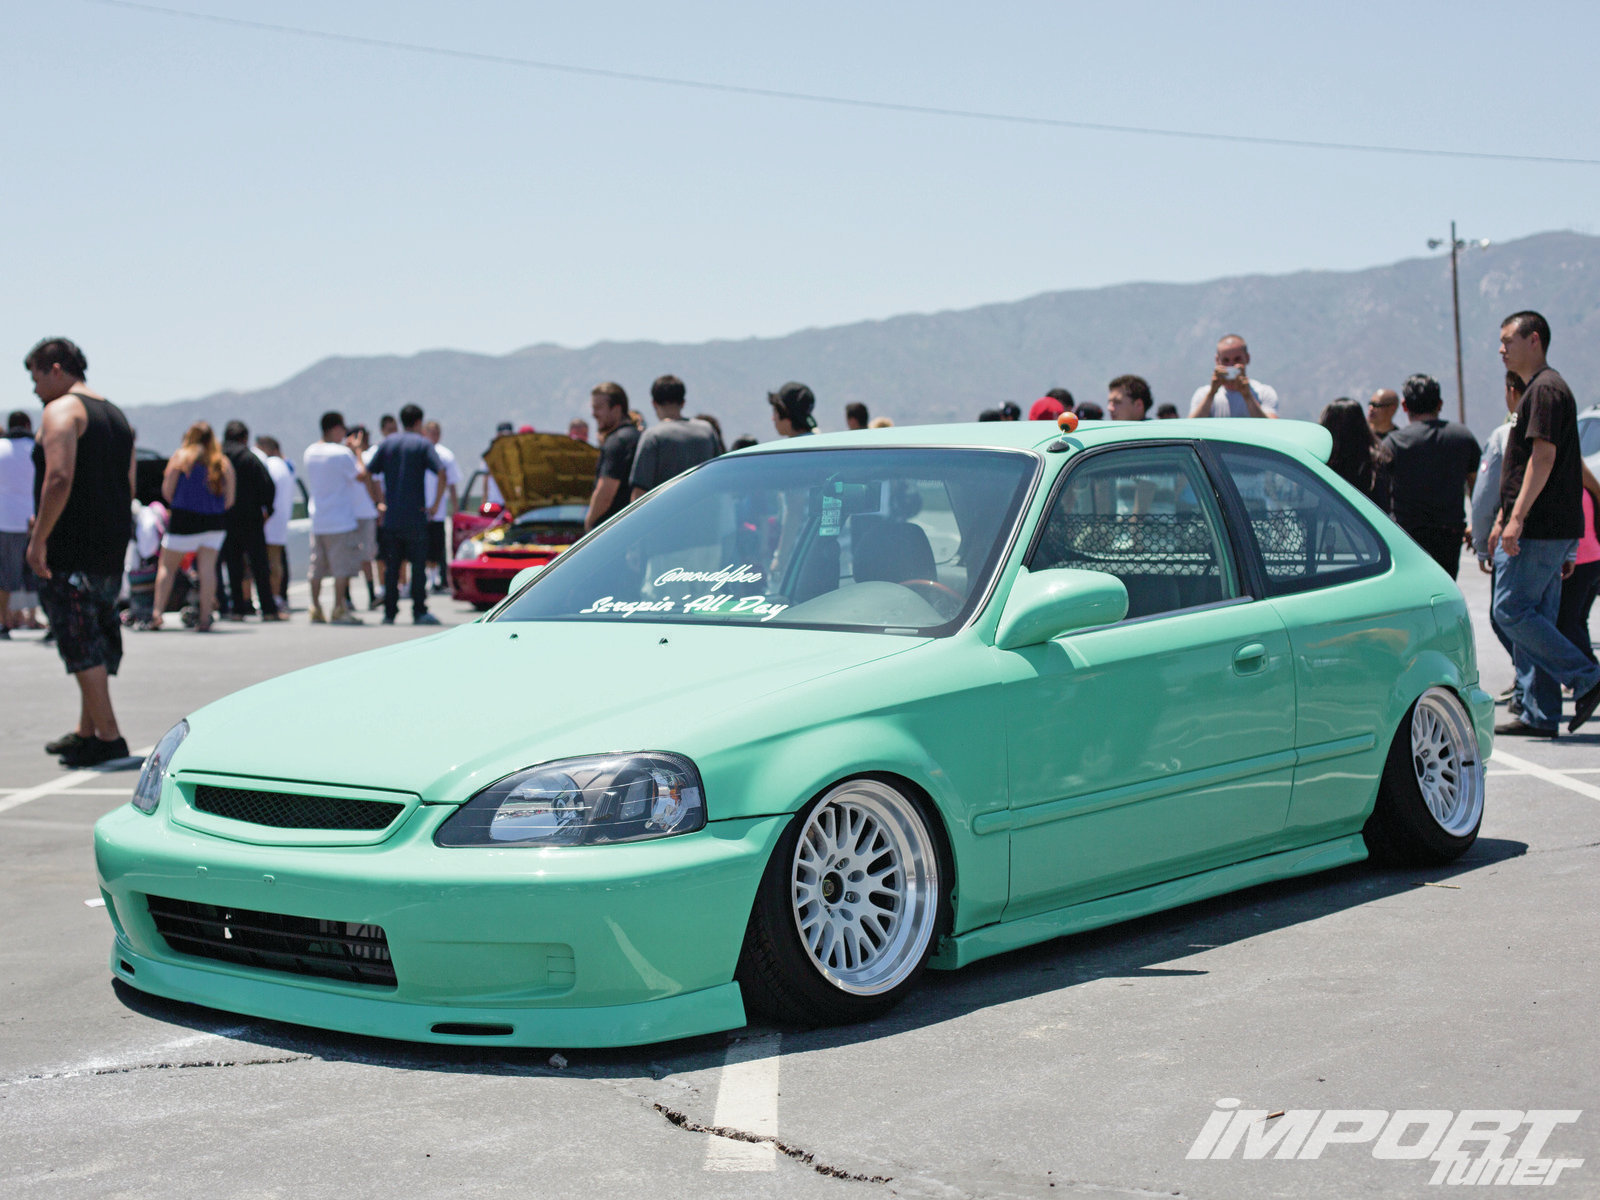 Civic with negative camber